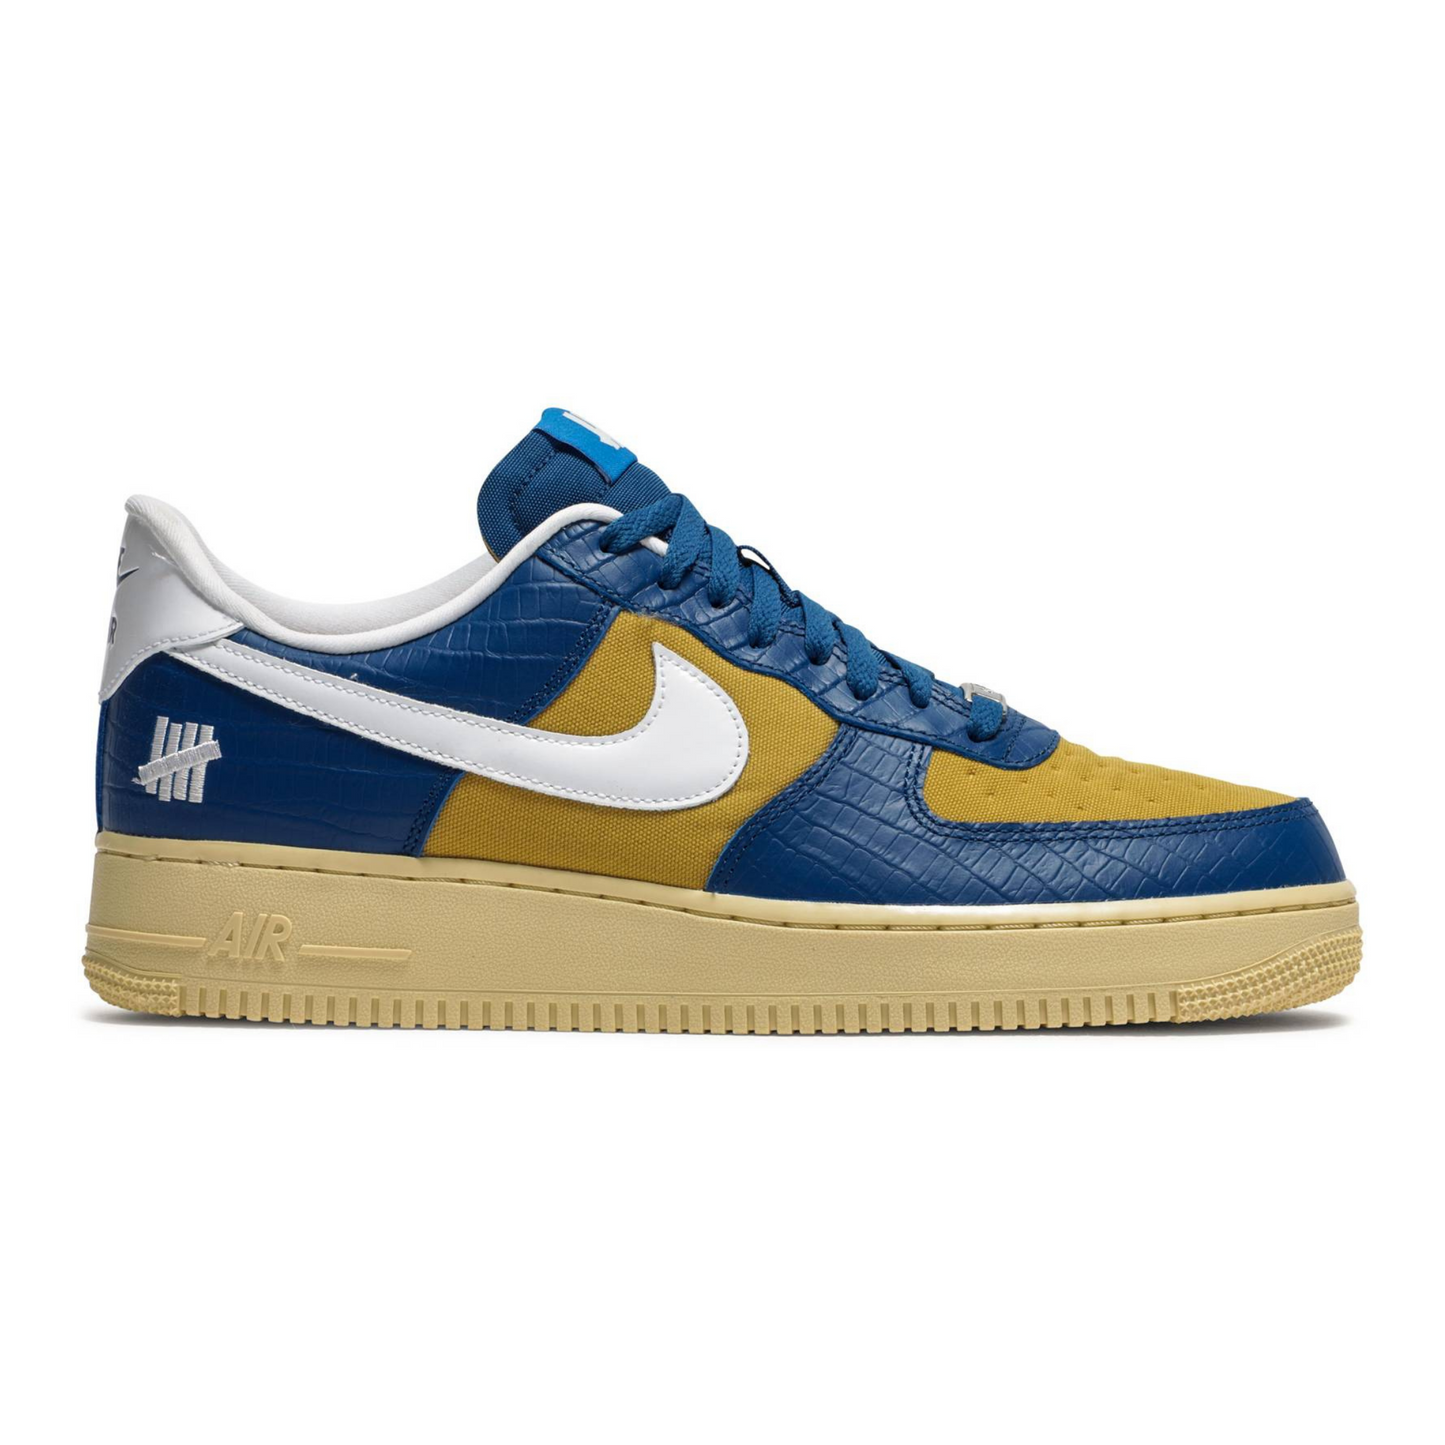 Undefeated x Nike Air Force 1 Low SP '5 On It Yellow Croc’